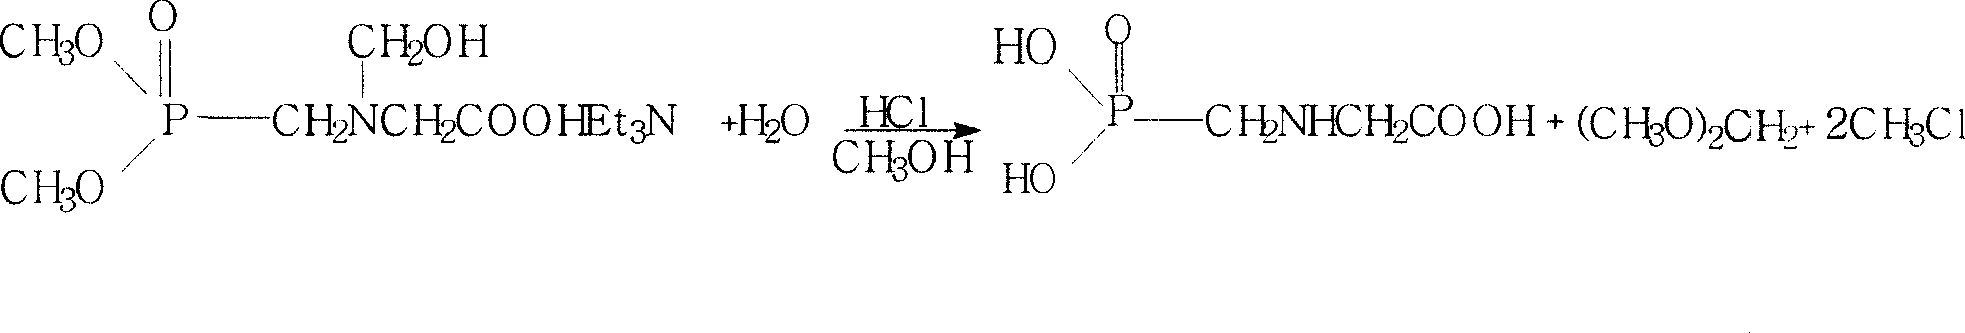 Continuous synthesis of glyphosate by dimethyl ester